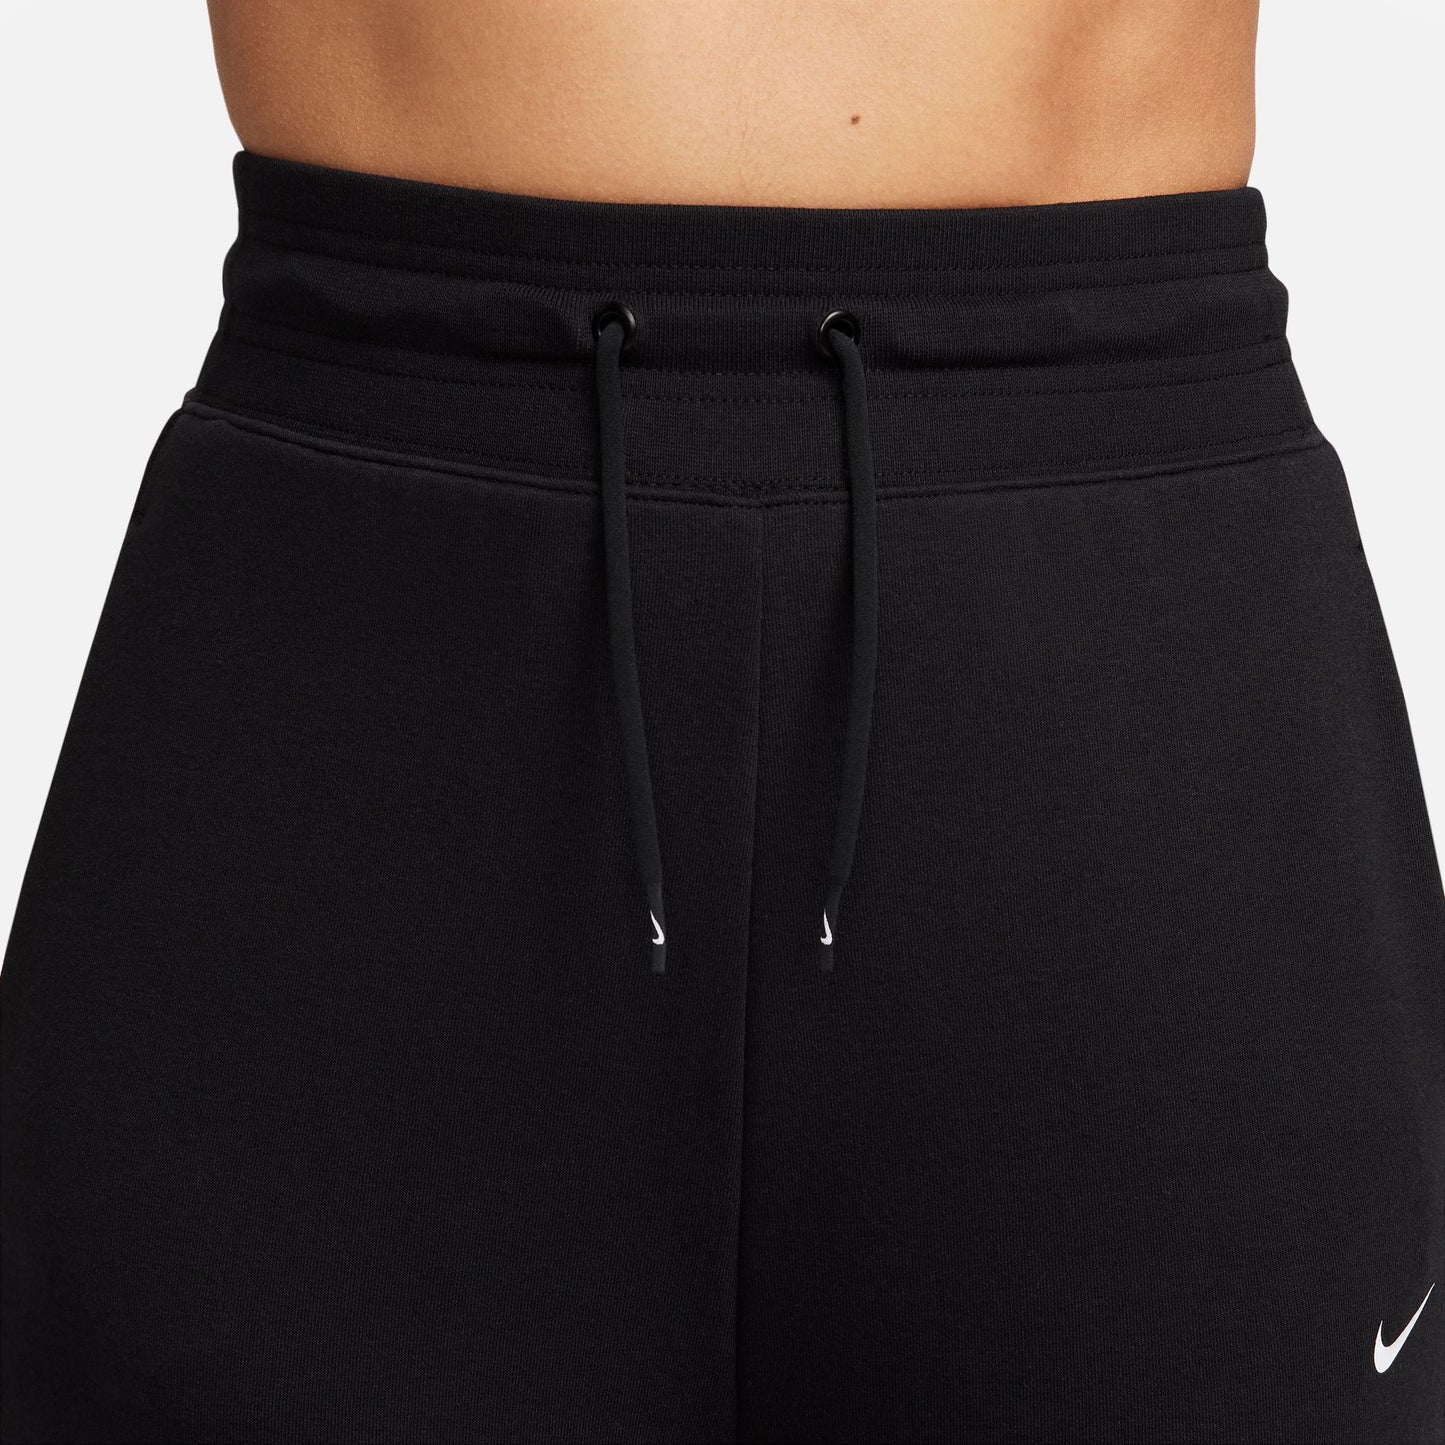 Nike Dri-FIT One - Women's High-Waisted 7/8 French Terry Joggers - Black